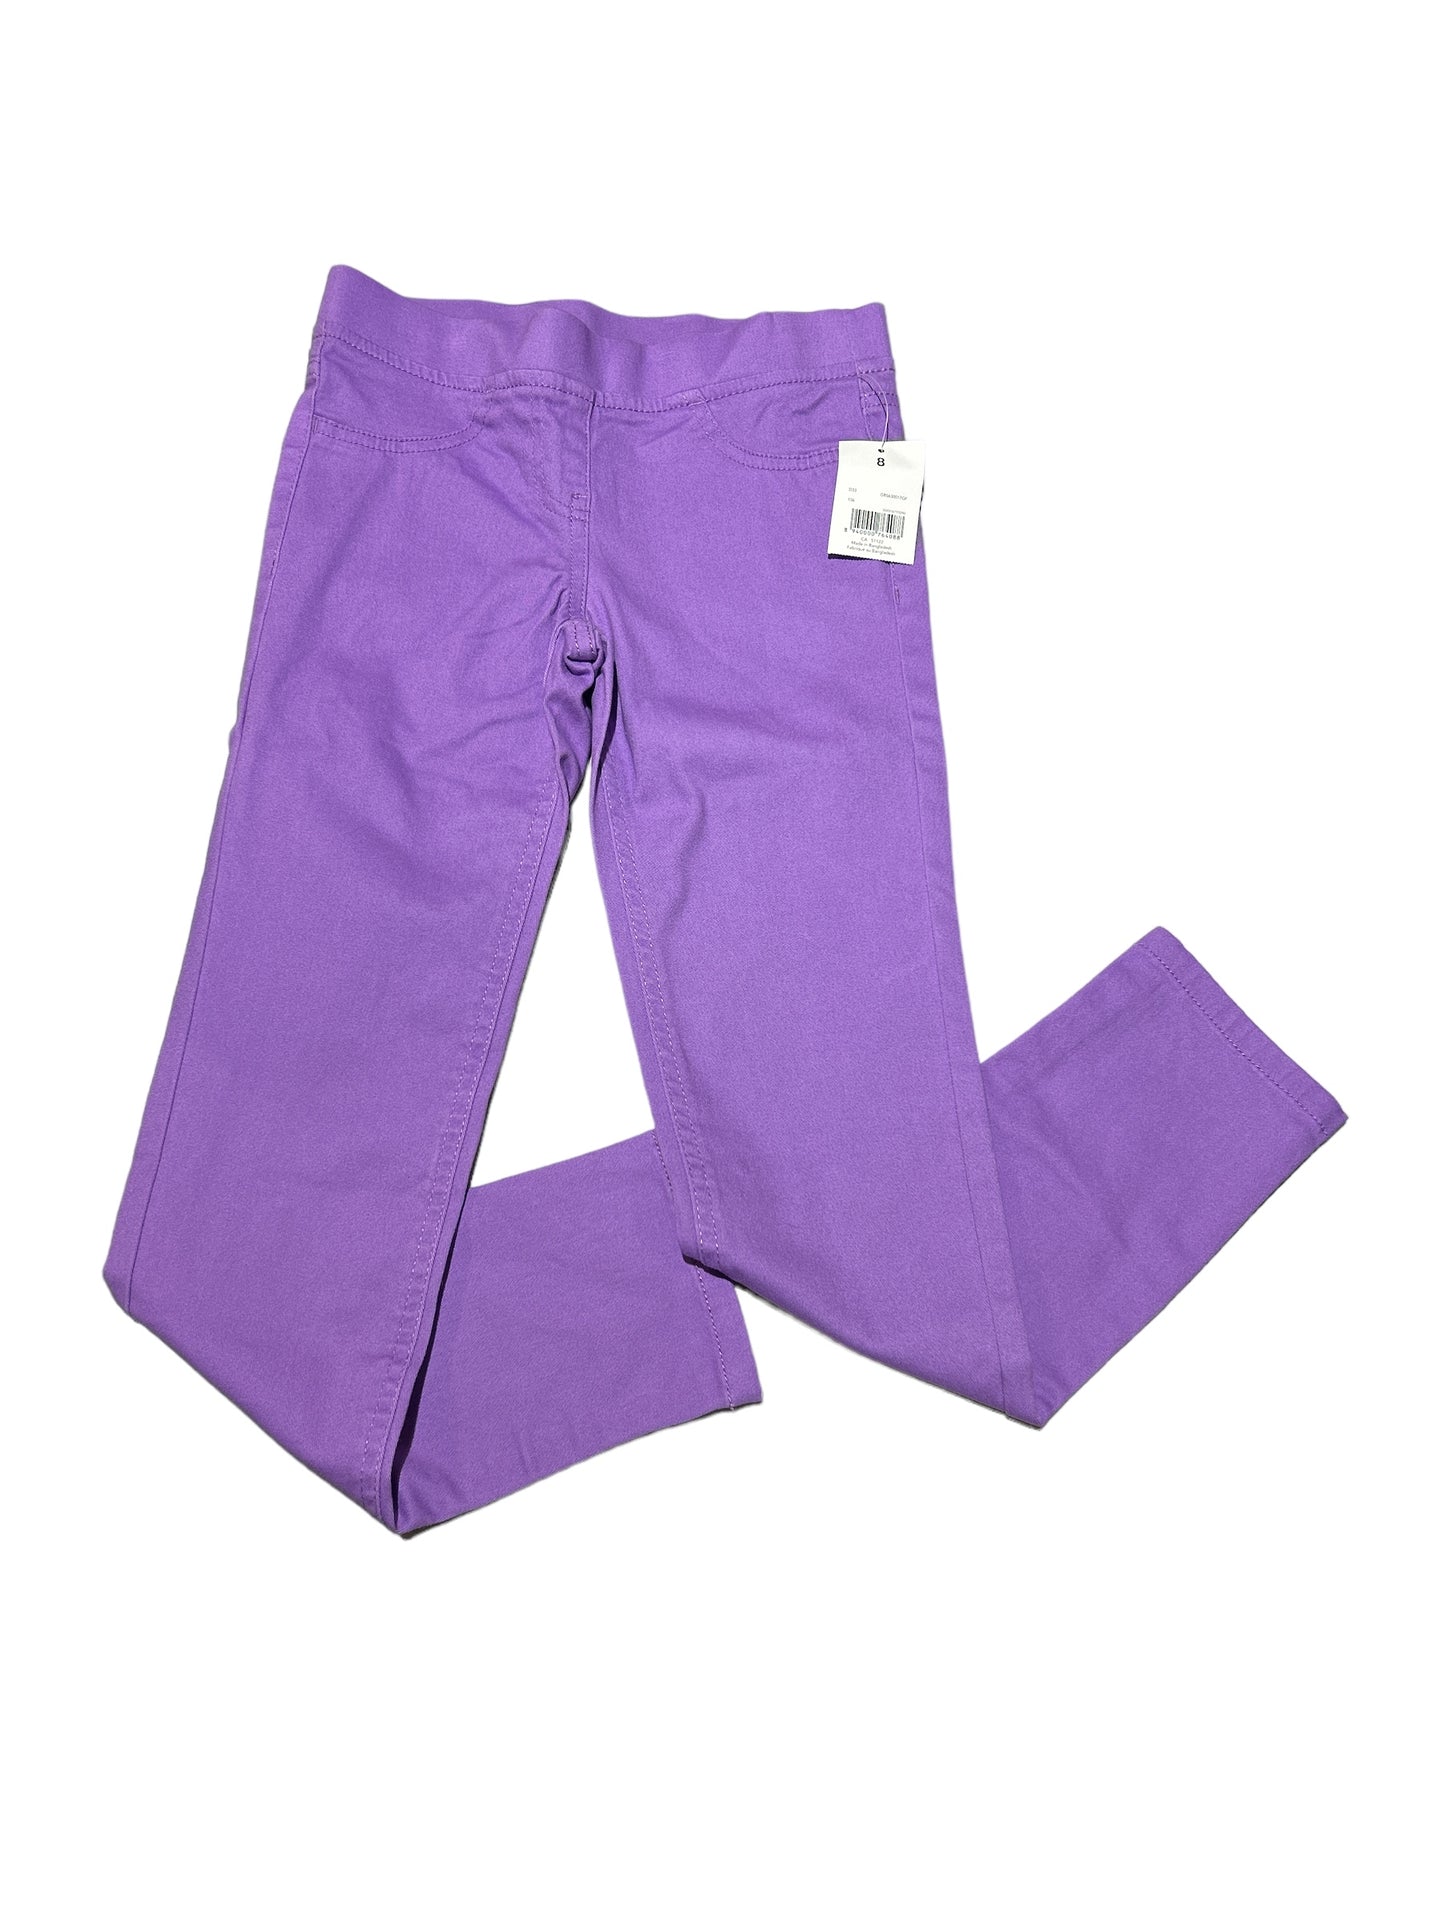 NWT fitted pants. Size 8